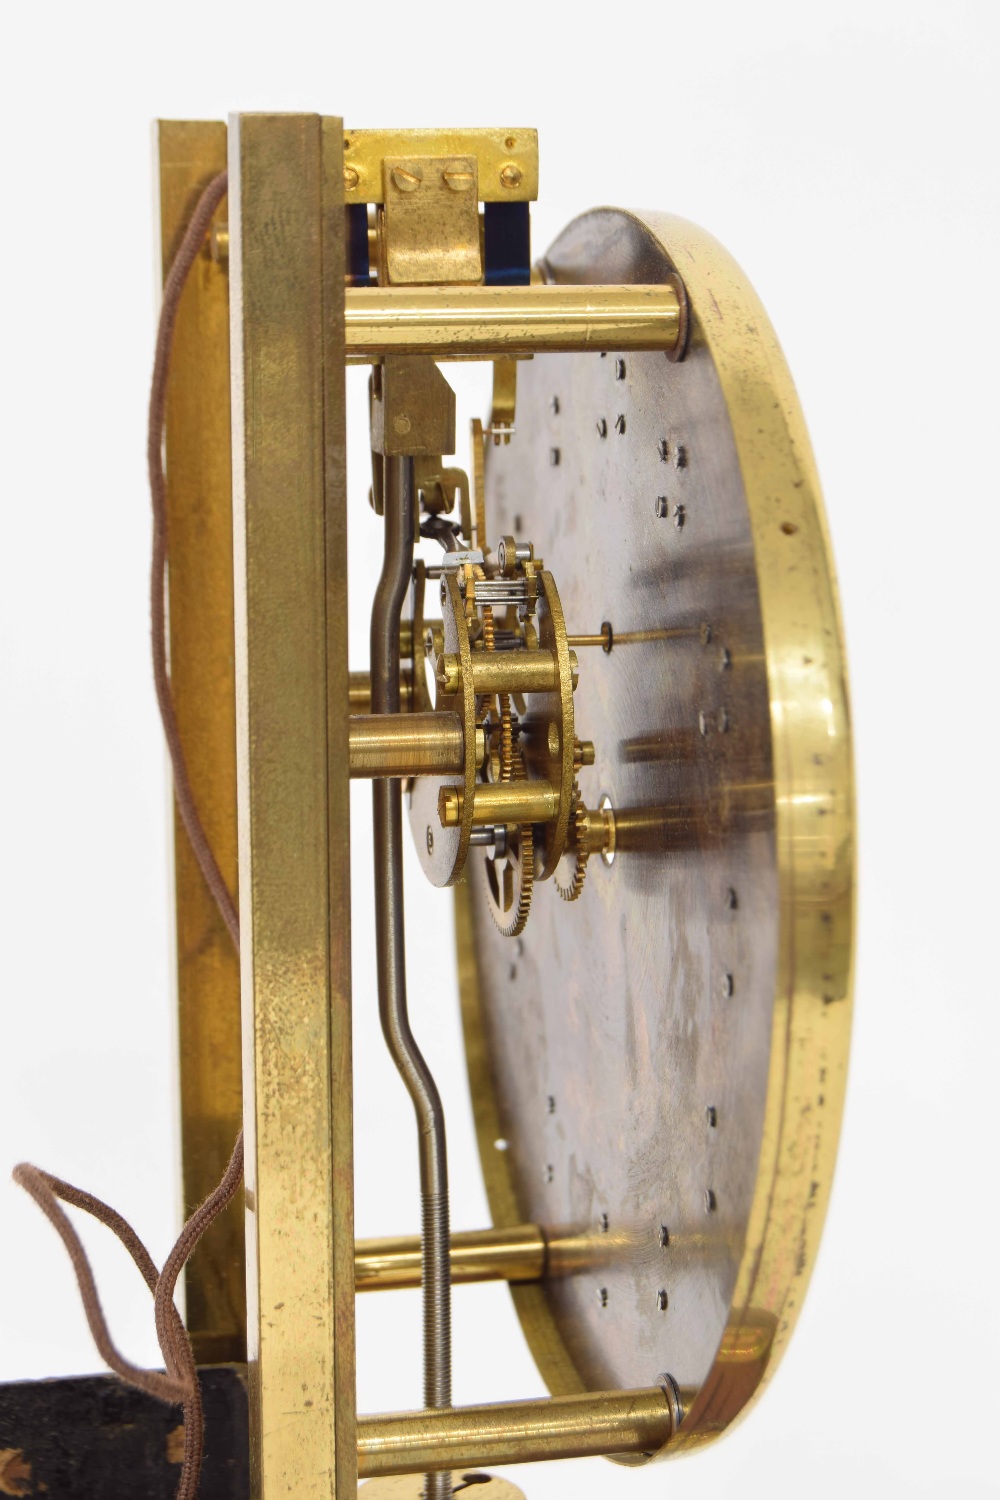 Ato electric mantel clock, the 4" silvered dial with subsidiary seconds dial, supported upon a - Image 2 of 3